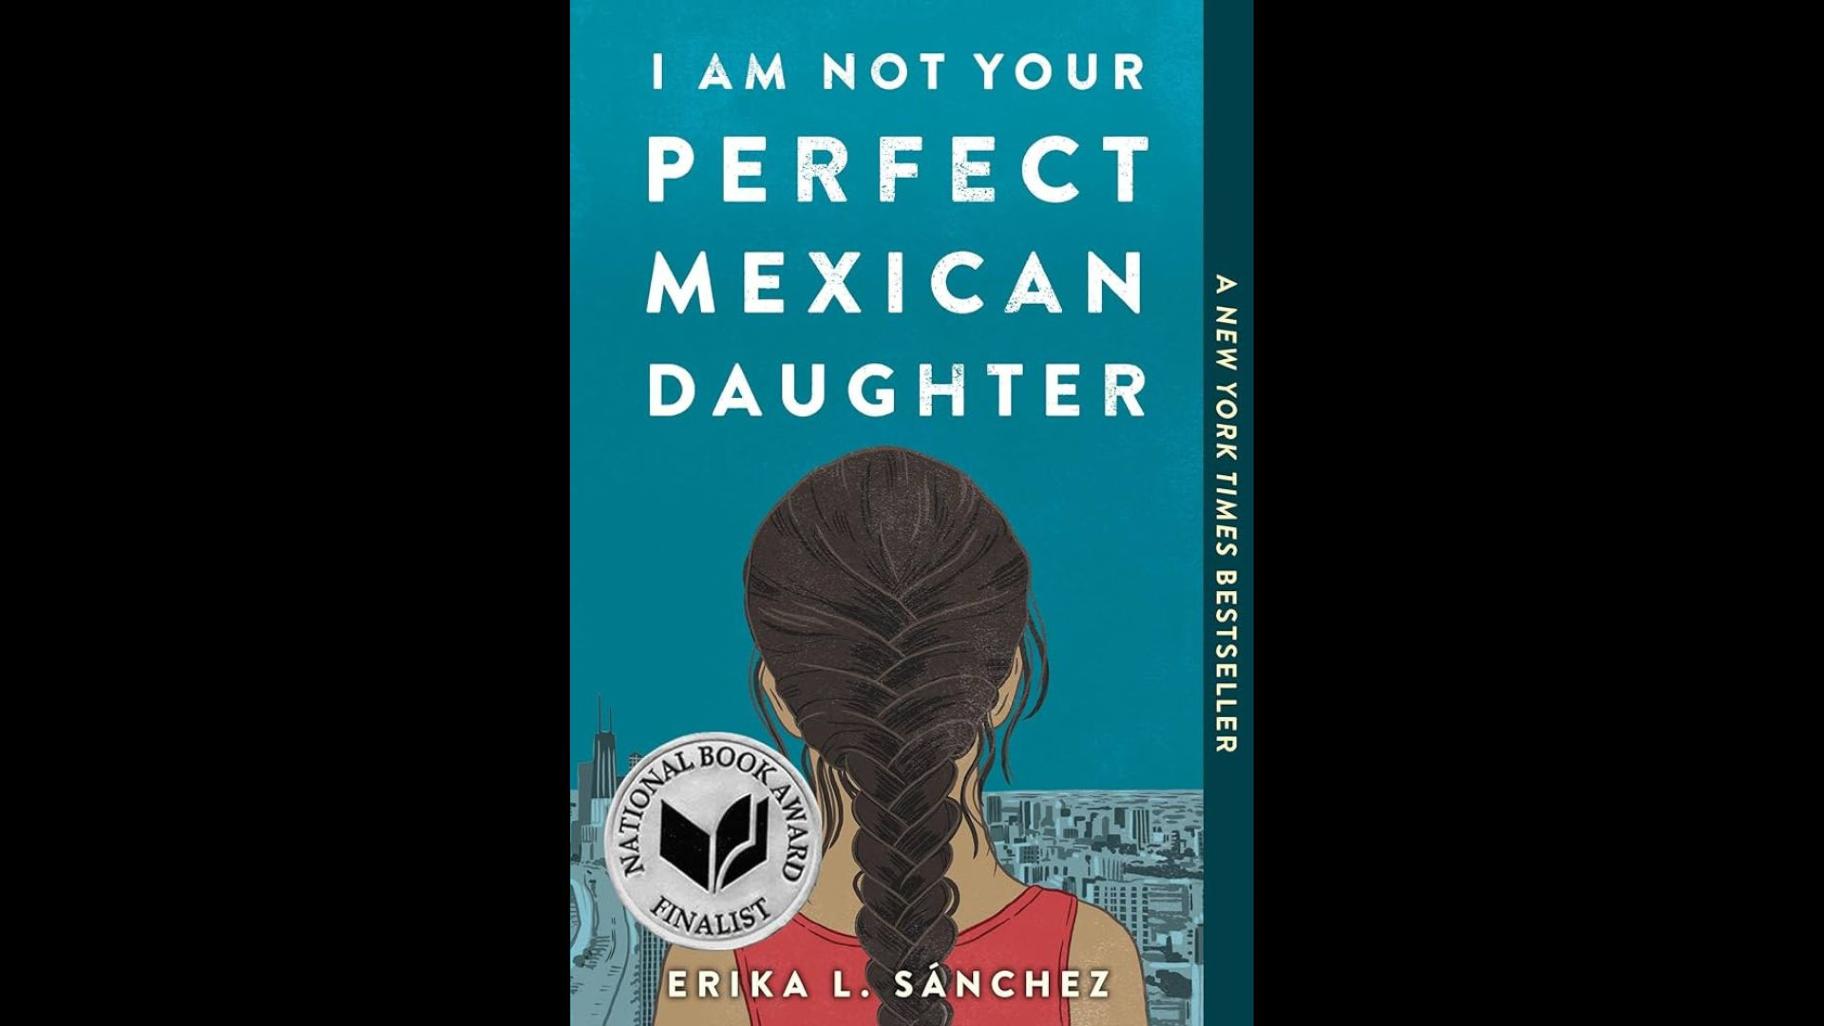 America Ferrera to adapt I Am Not Your Perfect Mexican Daughter novel to  big screen